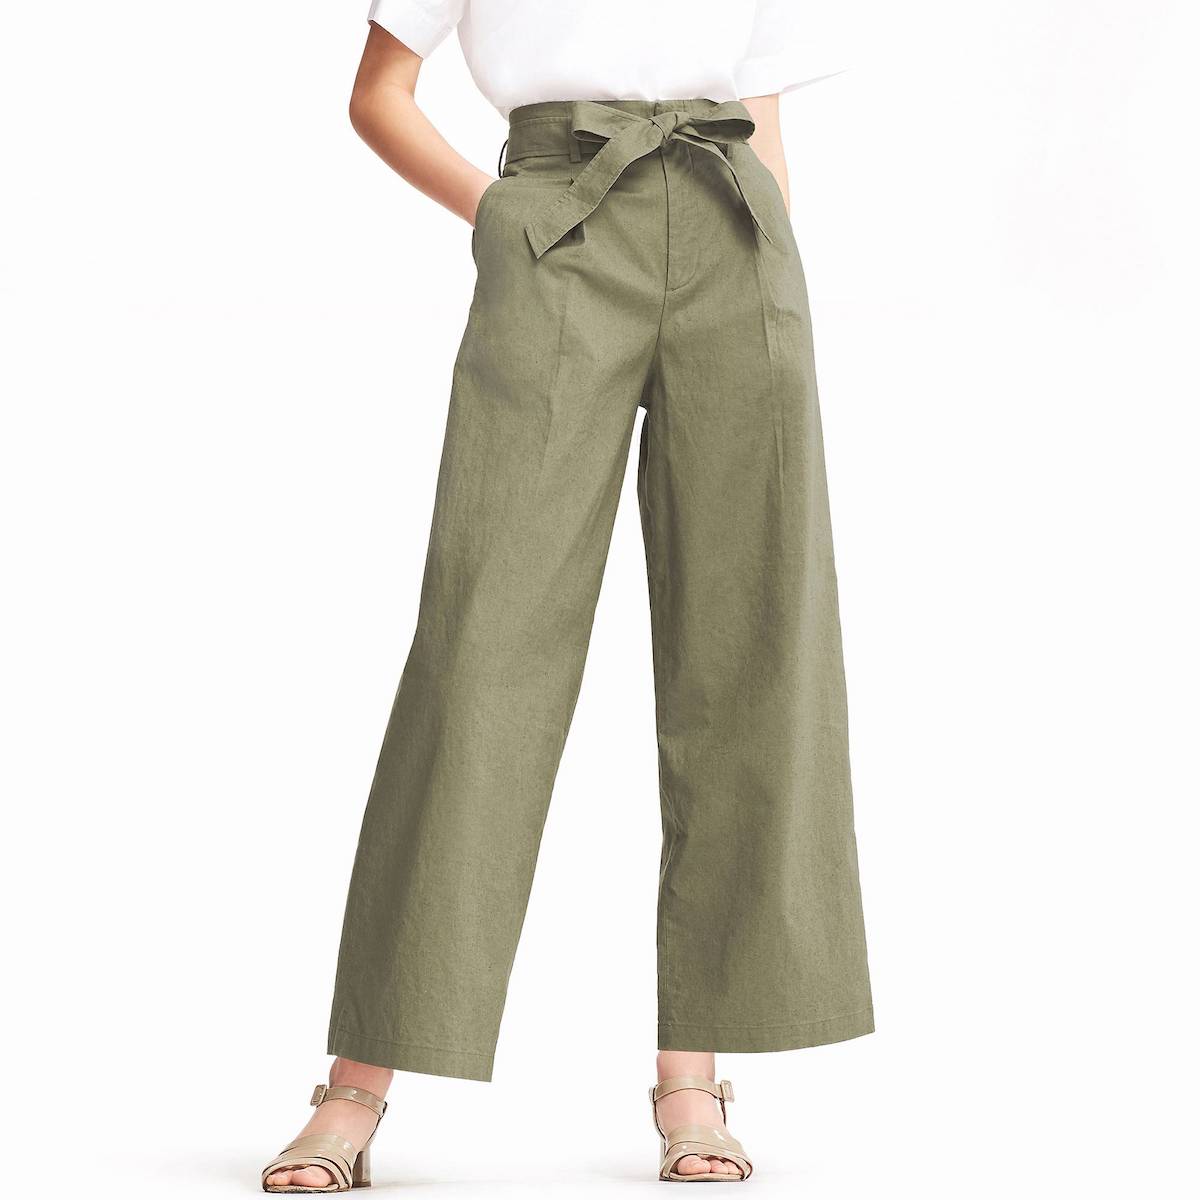 Uniqlo wide cotton linen pants, with a fabric belt